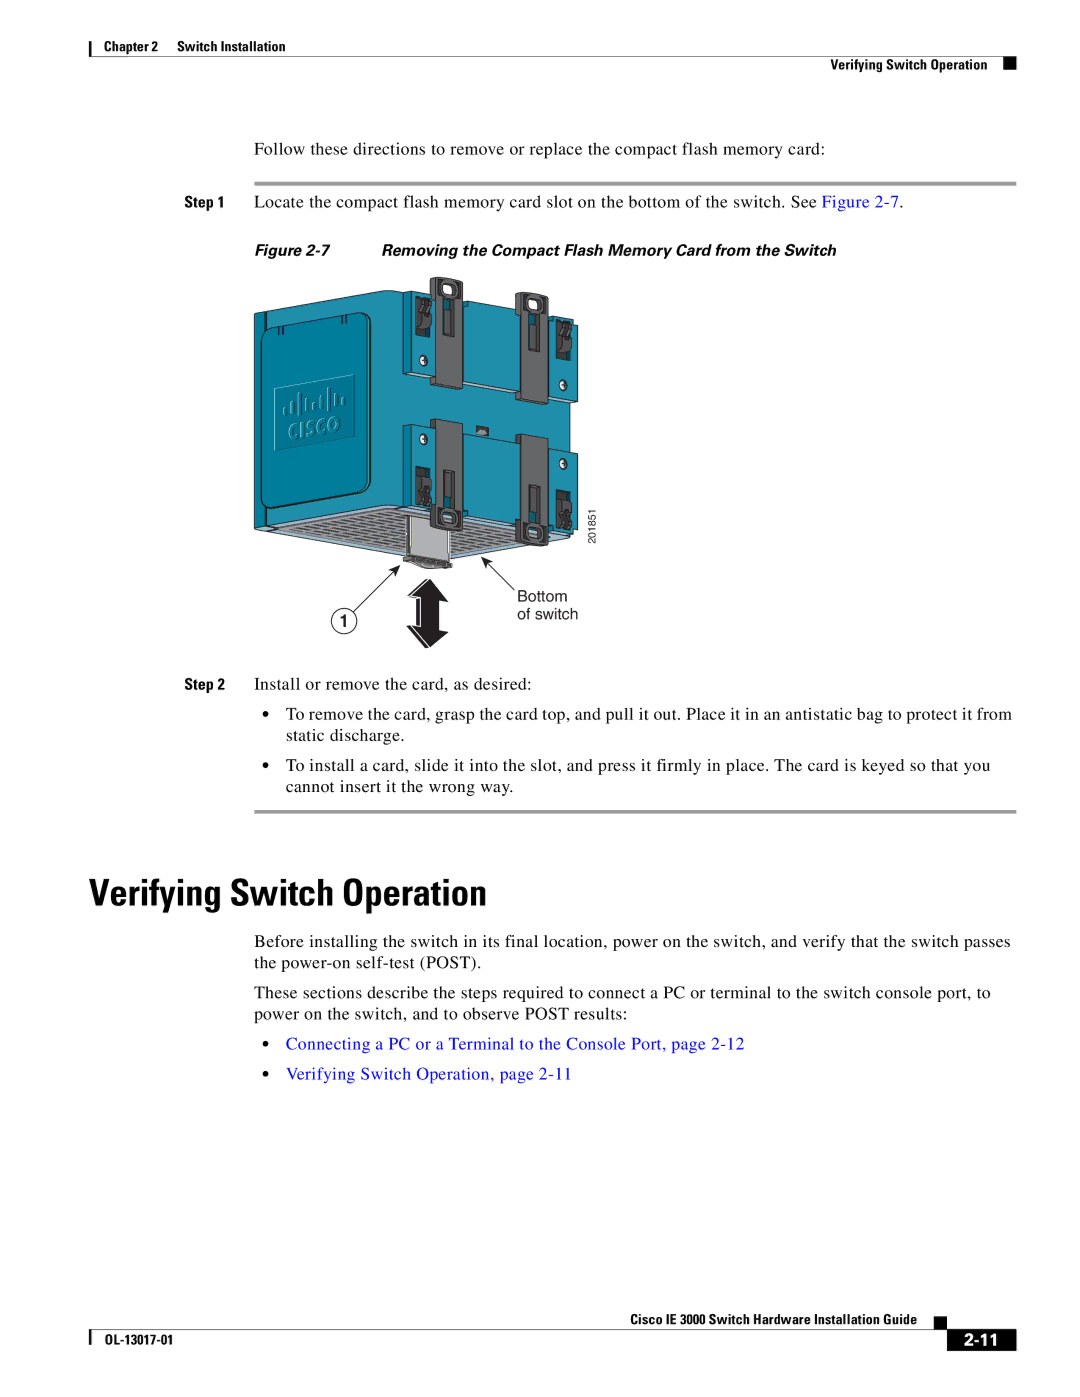 Cisco Systems IE 3000 Series manual Verifying Switch Operation, Removing the Compact Flash Memory Card from the Switch 